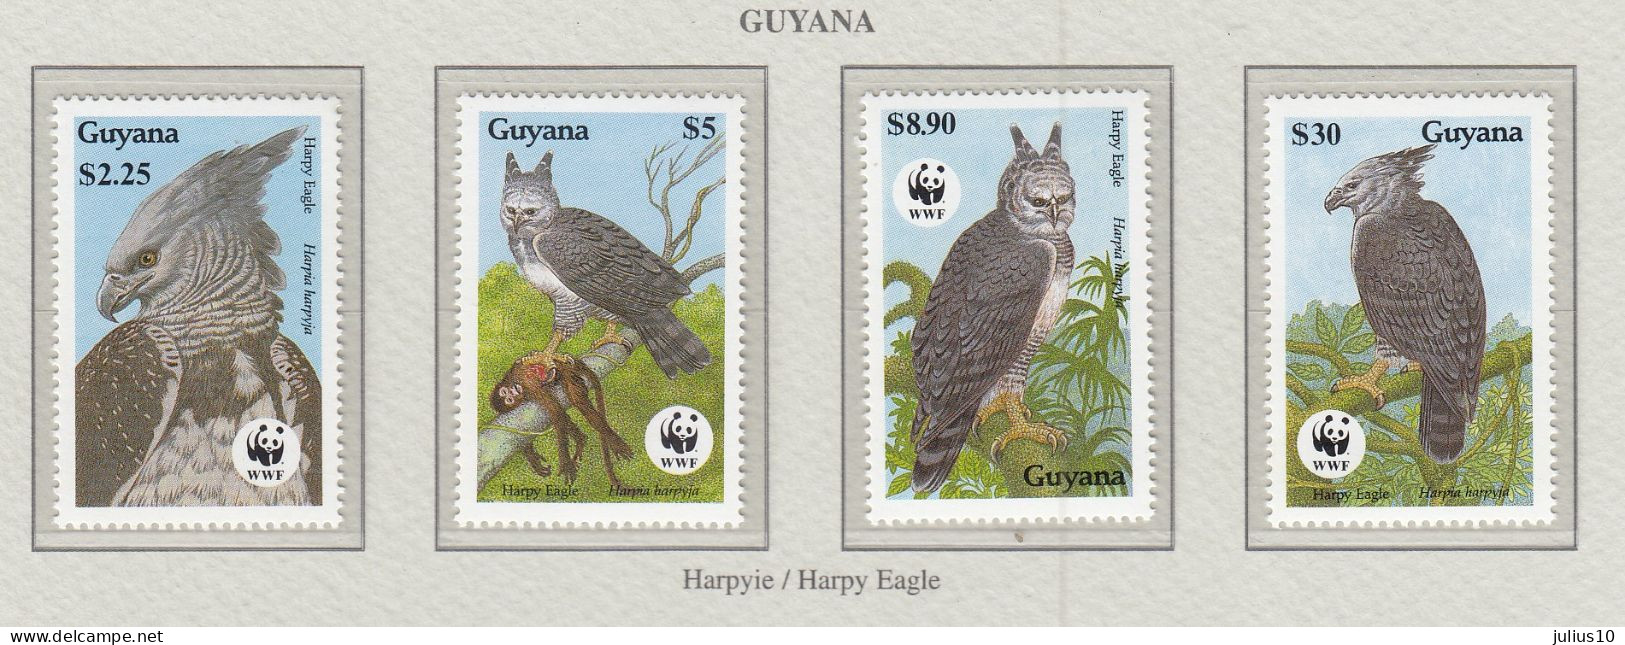 GUYANA 1990 WWF Birds Of Prey Mi 3077-3080 MNH(**) Fauna 772 - Arends & Roofvogels